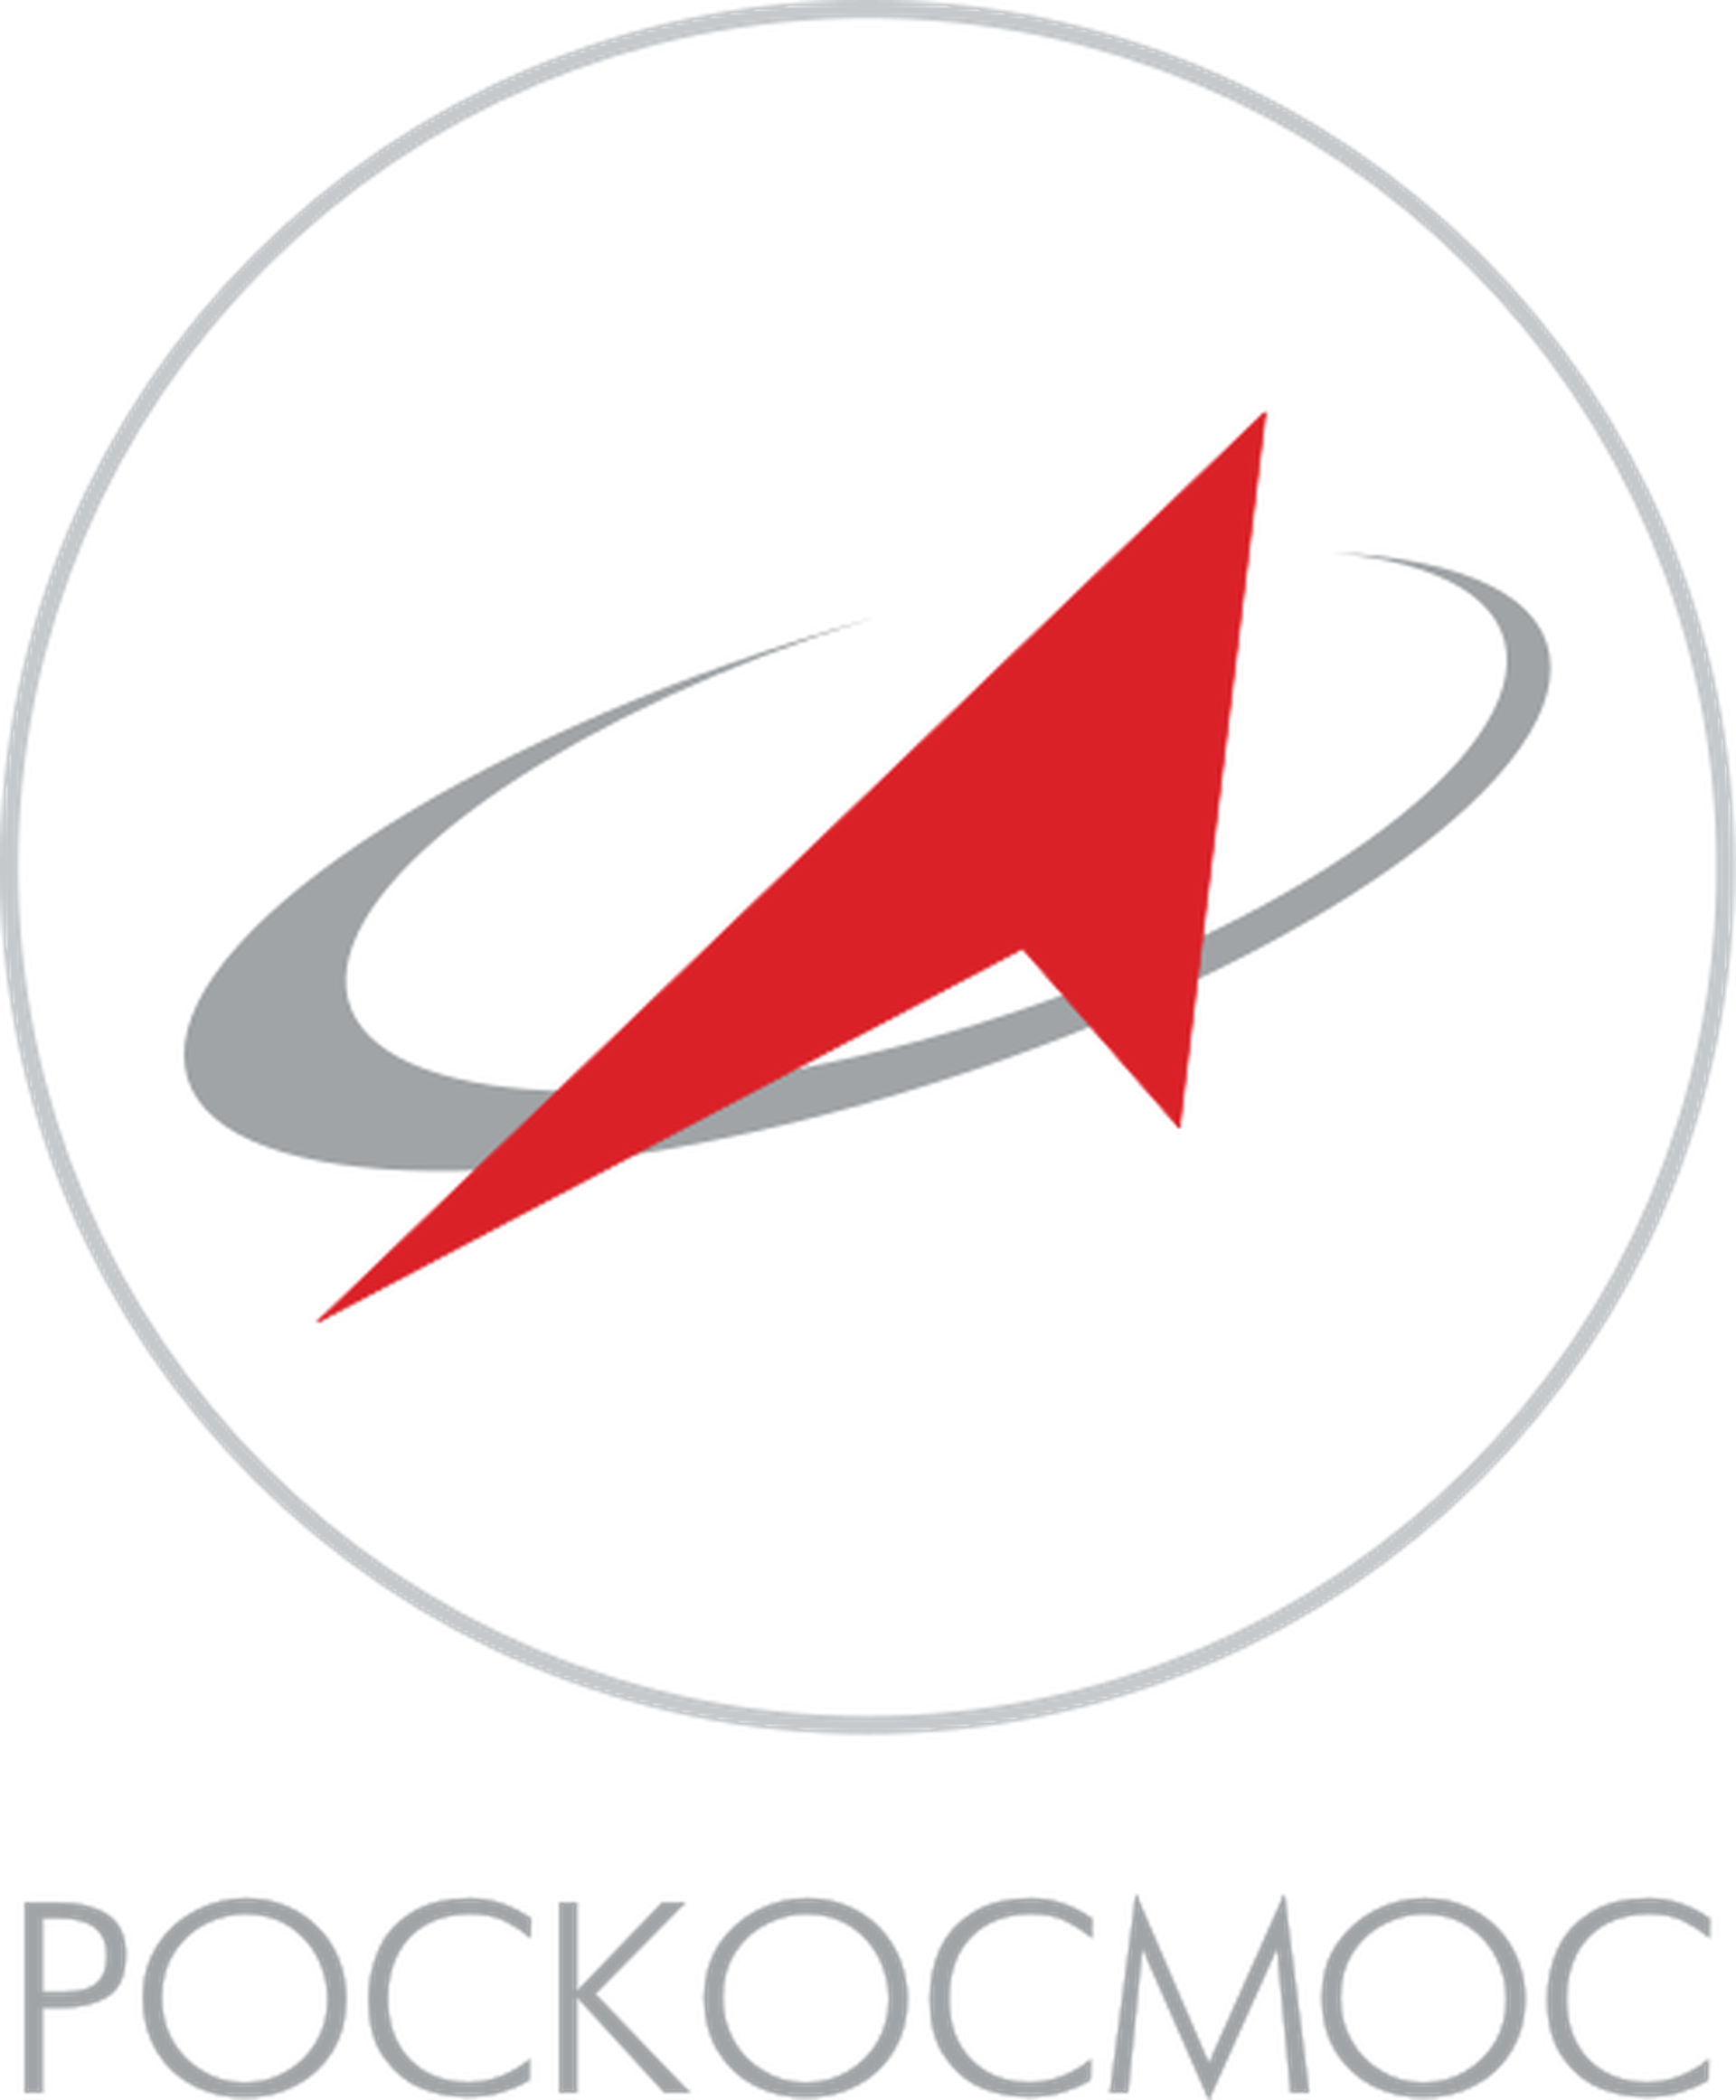 Russian Federal Space Agency (ROSCOSMOS)'s logo